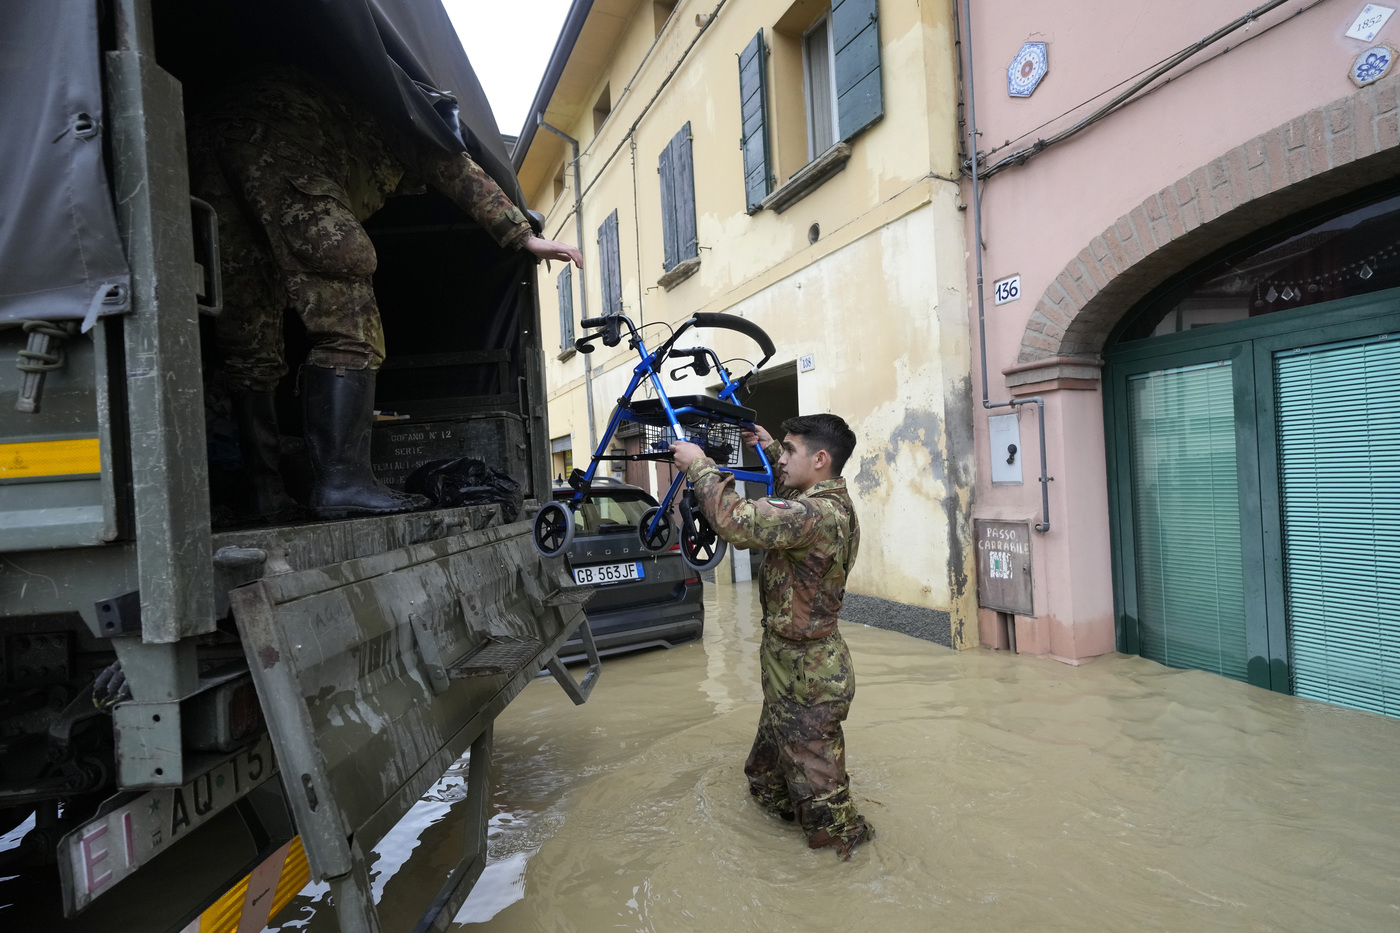 A soldier carries a walker in the flooded village of Castel Bolognese, Italy, Wednesday, May 17, 2023. Exceptional rains Wednesday in a drought-struck region of northern Italy swelled rivers over their banks, killing at least eight people, forcing the evacuation of thousands and prompting officials to warn that Italy needs a national plan to combat climate change-induced flooding. (AP Photo/Luca Bruno)